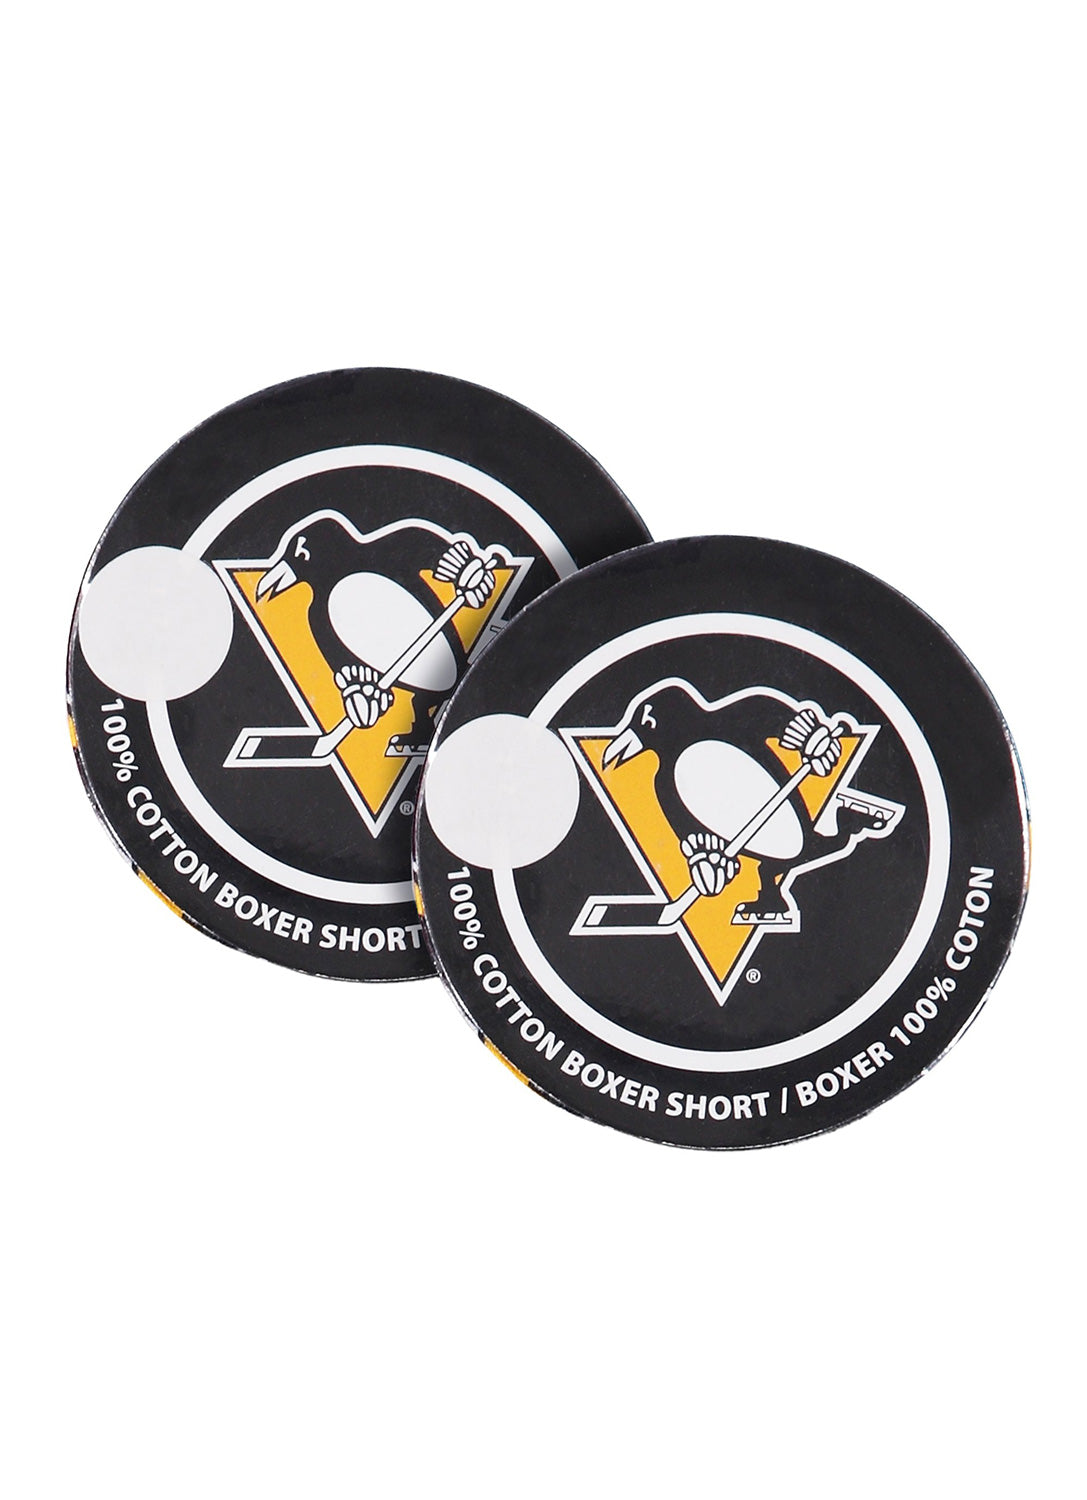 Pair of mens boxers puck package with Pittsburgh Penguins print (black)